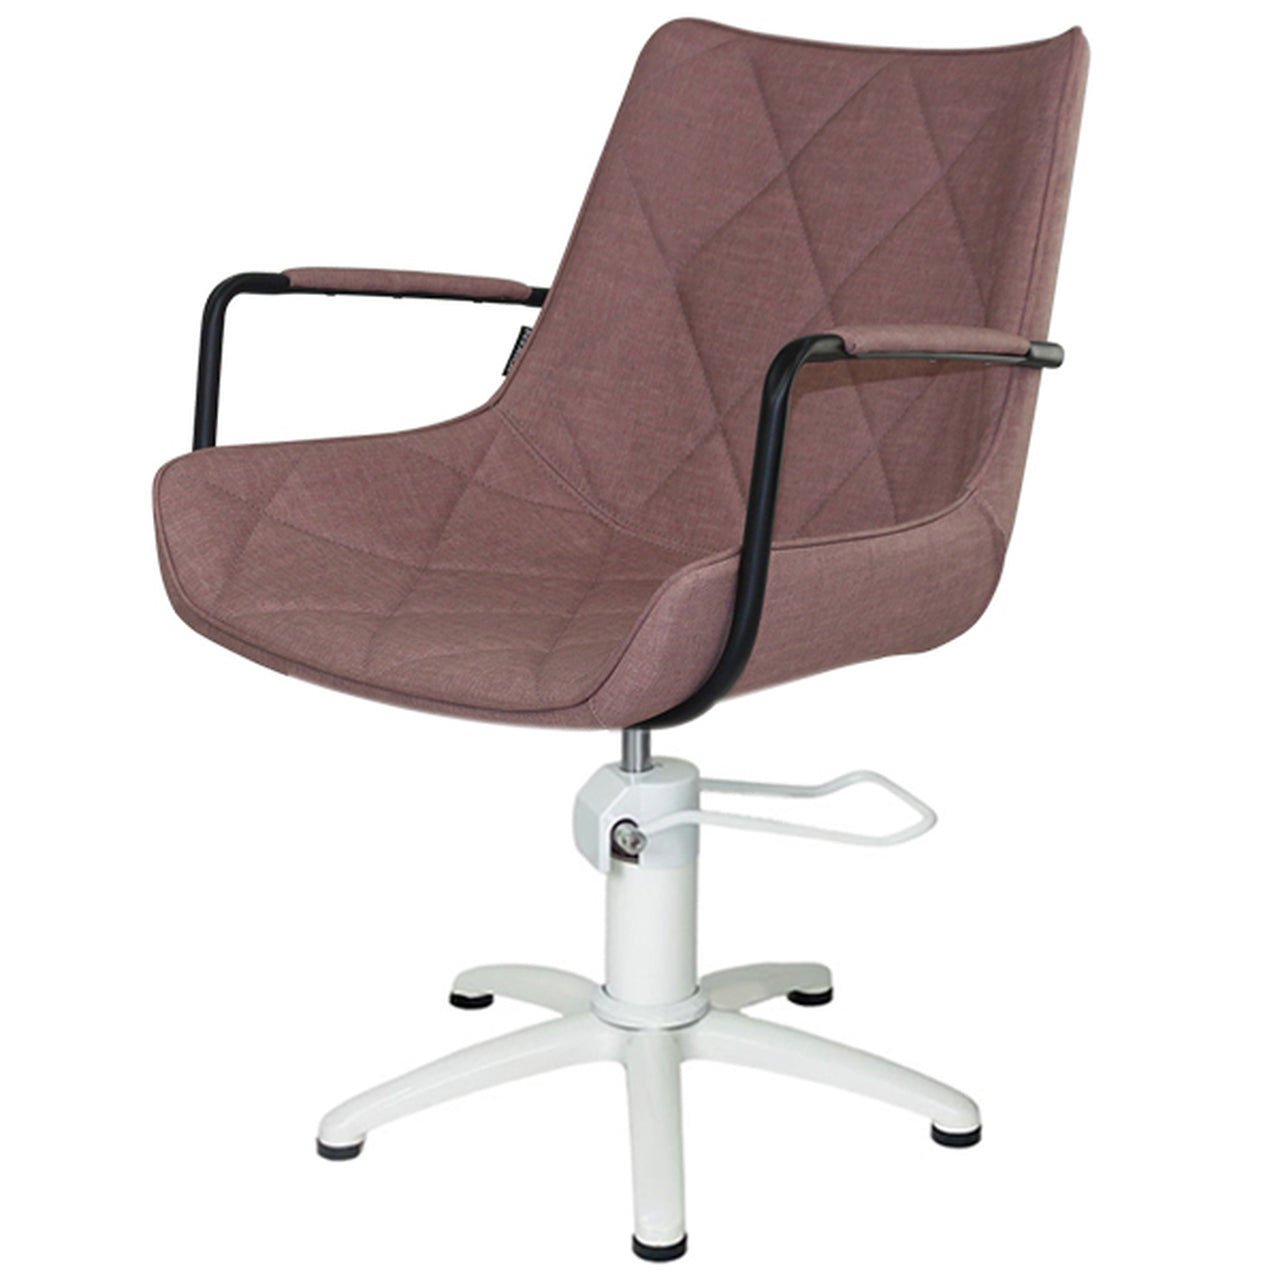 Taylor - WHITE 5 Star Hydraulic Dusty Pink Upholstery